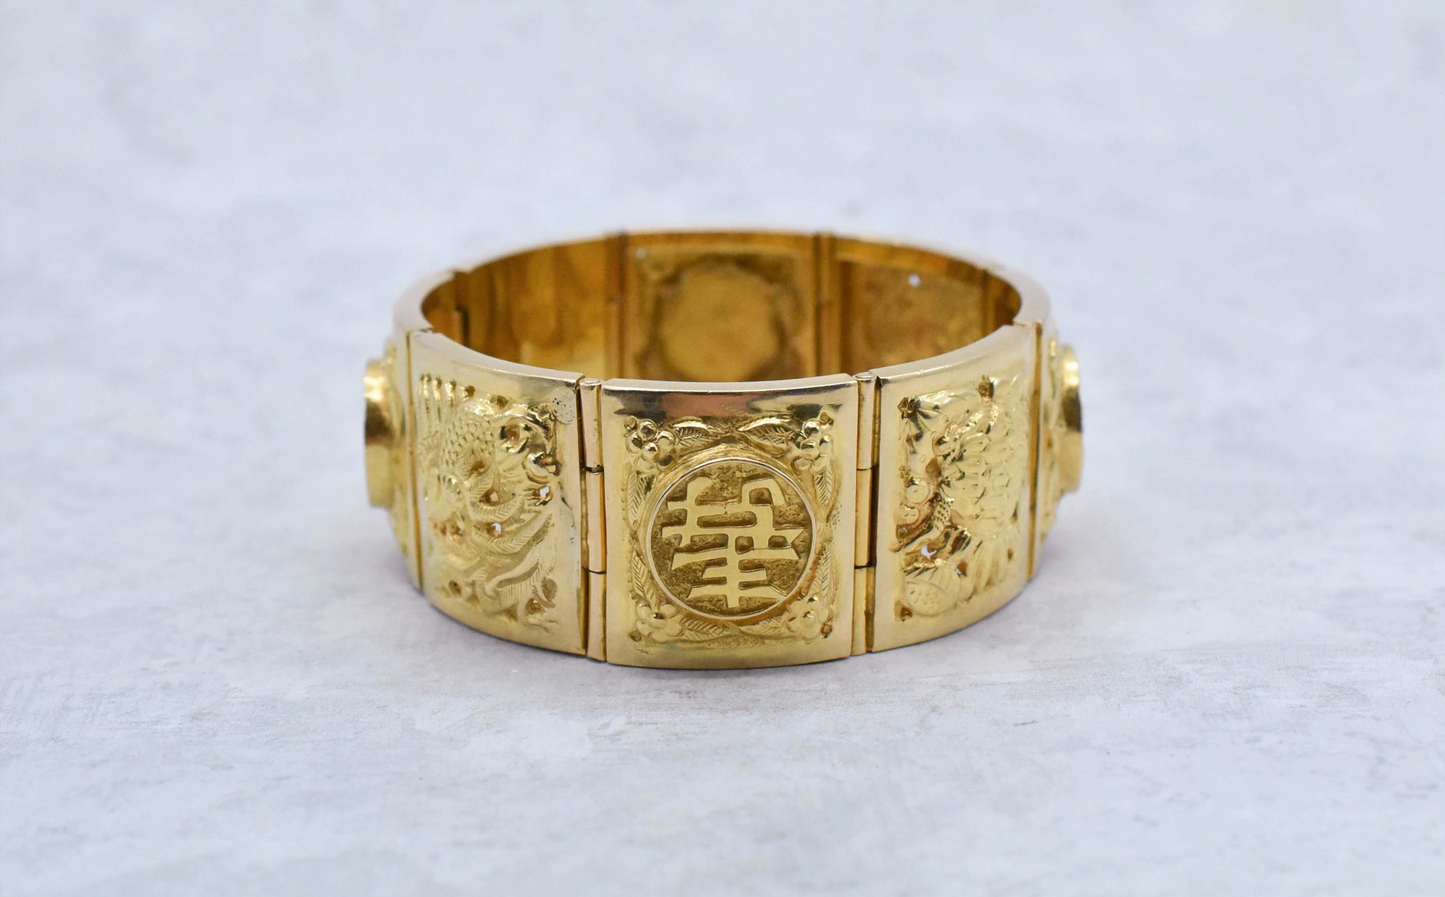 18k Yellow Gold Asian Plaque Hinge Cuff Bracelet, 7 inches - 37.0g